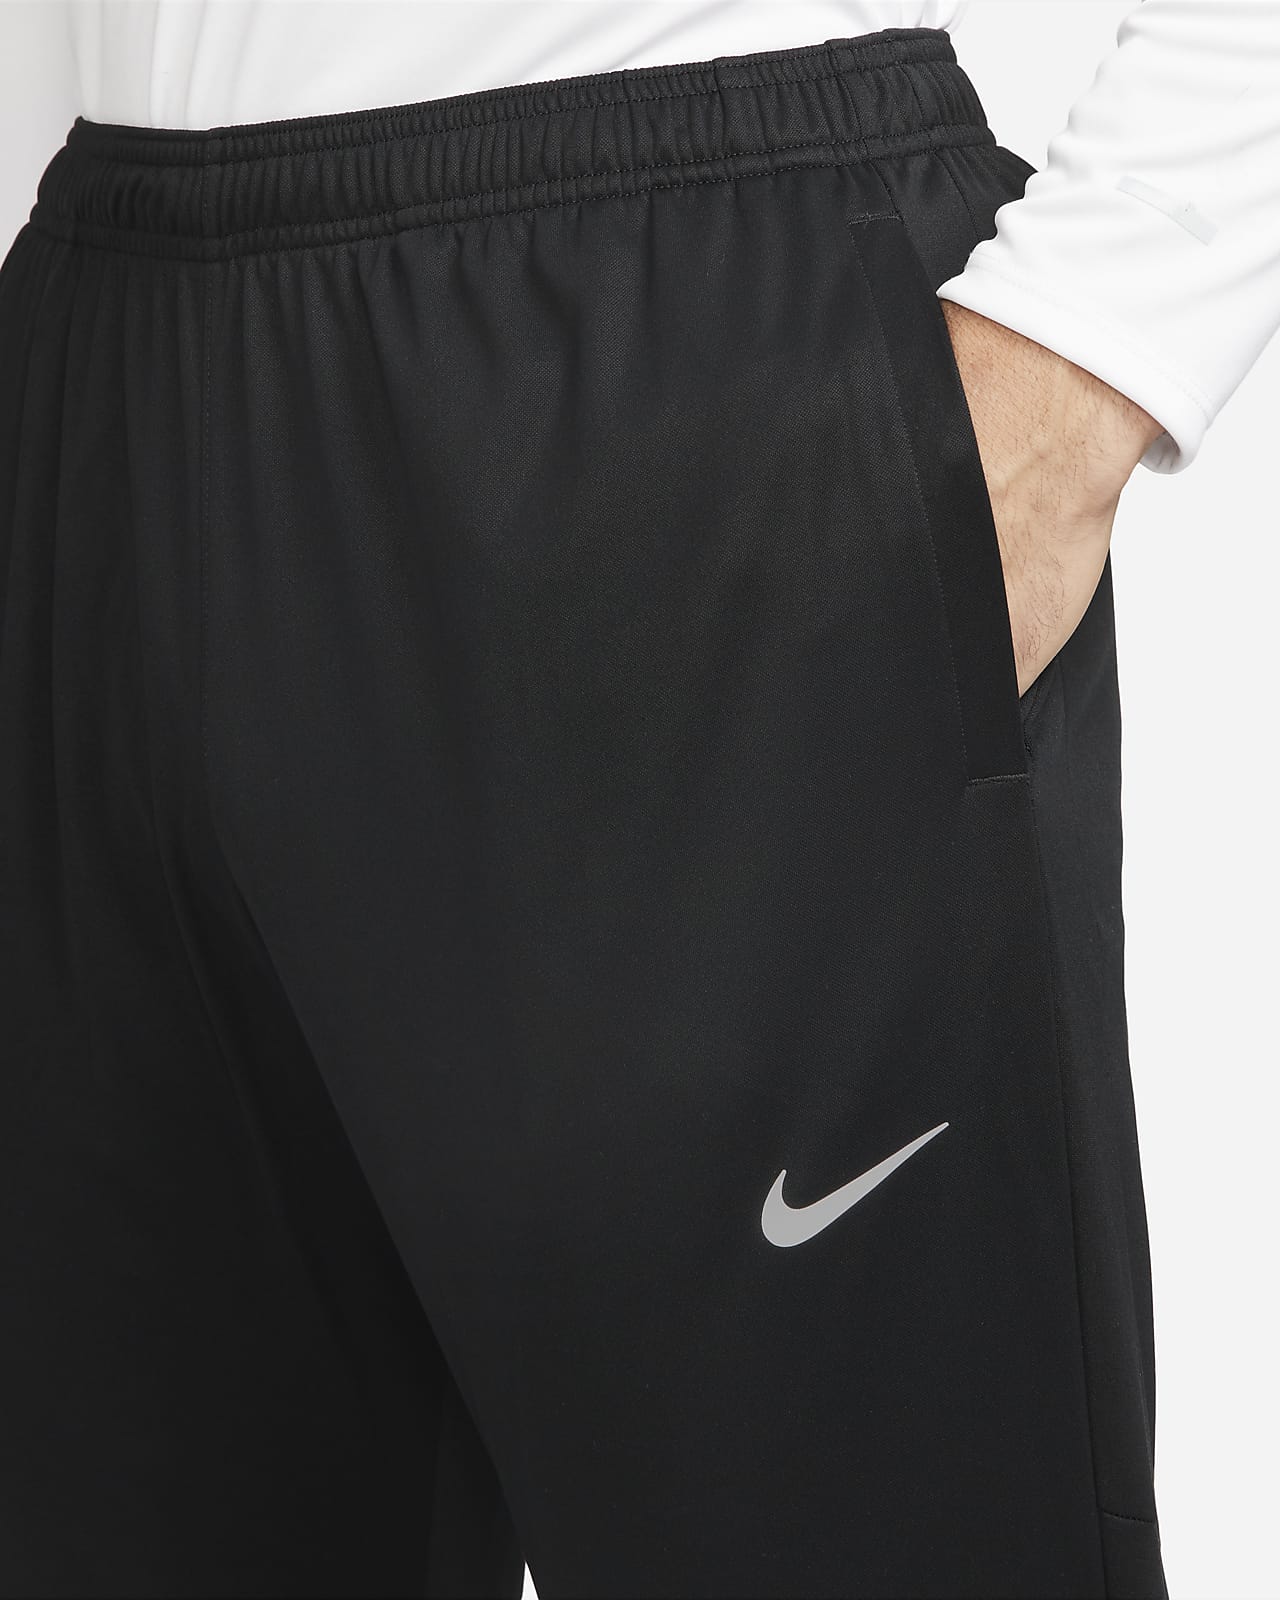  Nike Men's Repel Challenger Tight Pants (XX-Large